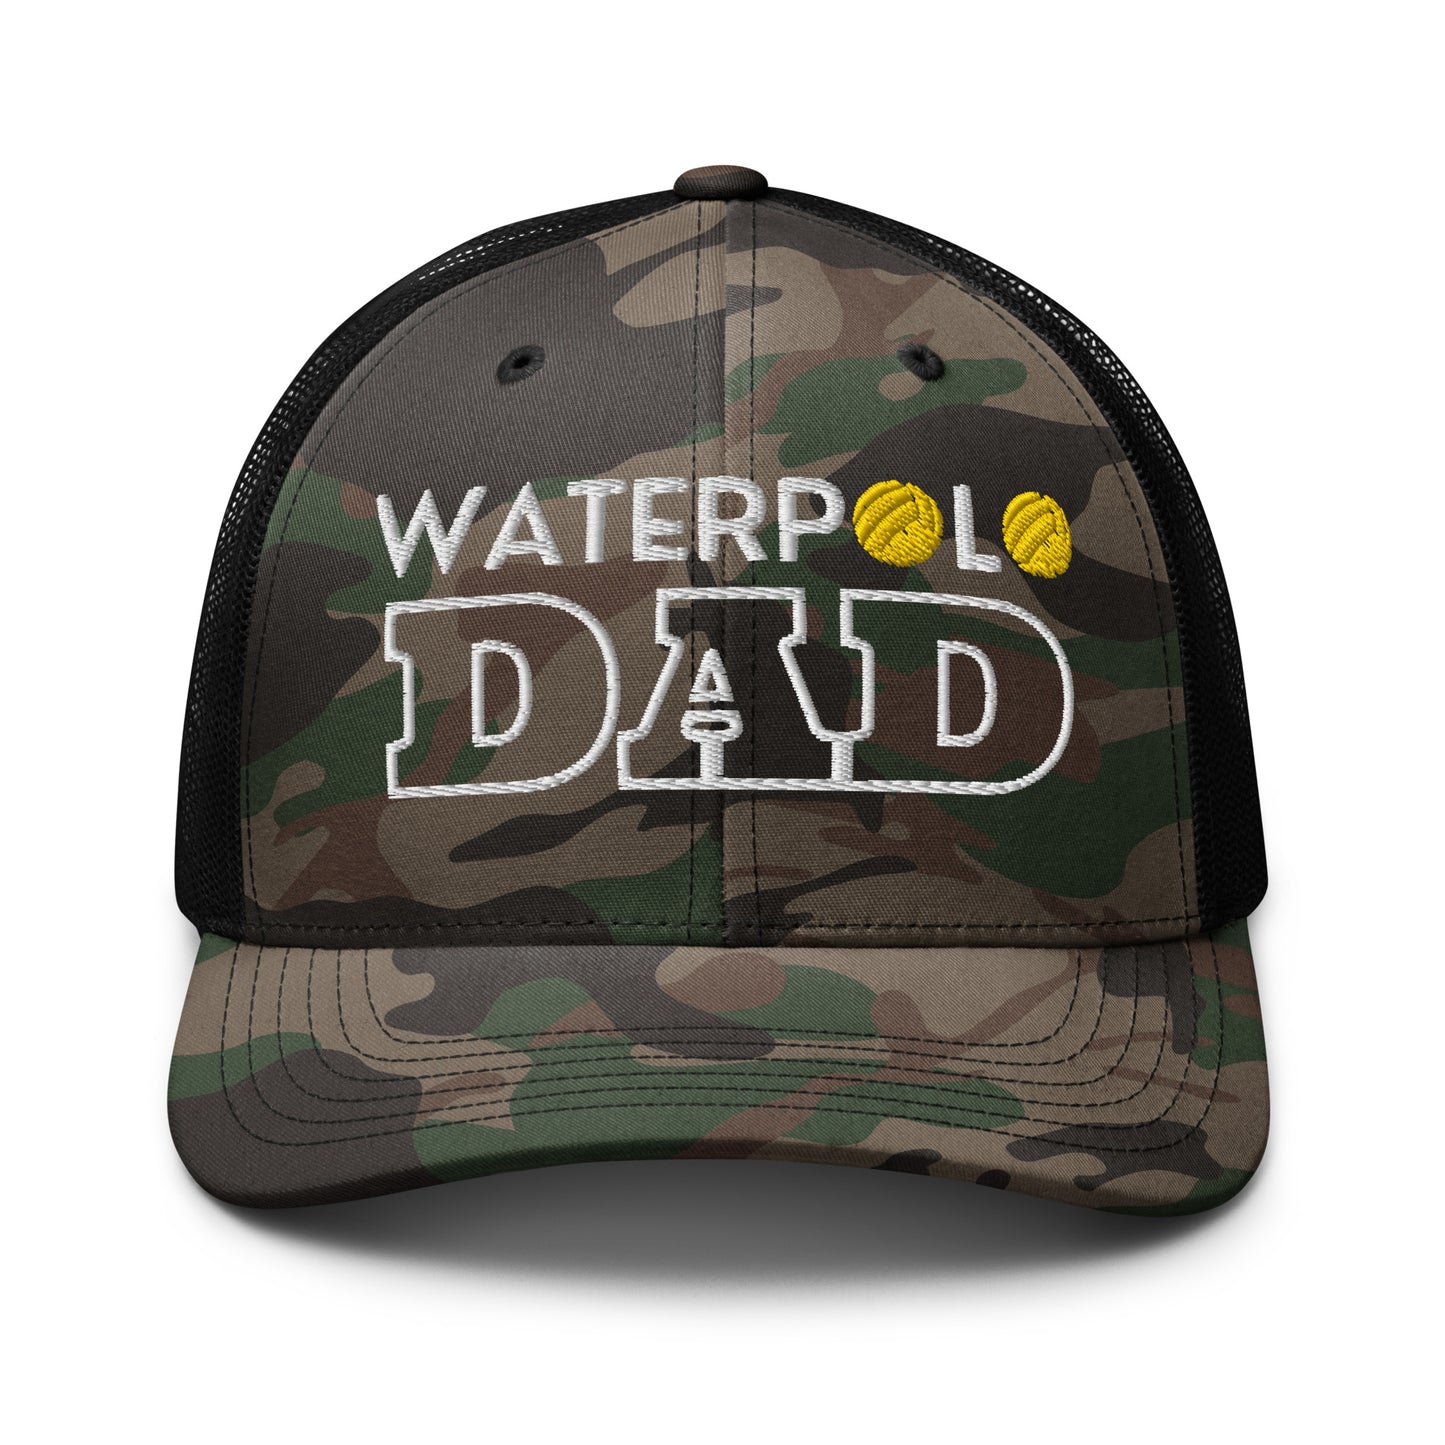 Waterpolo Dad - Embroidered Camouflage Trucker Hat | Otto Cap 105-1247